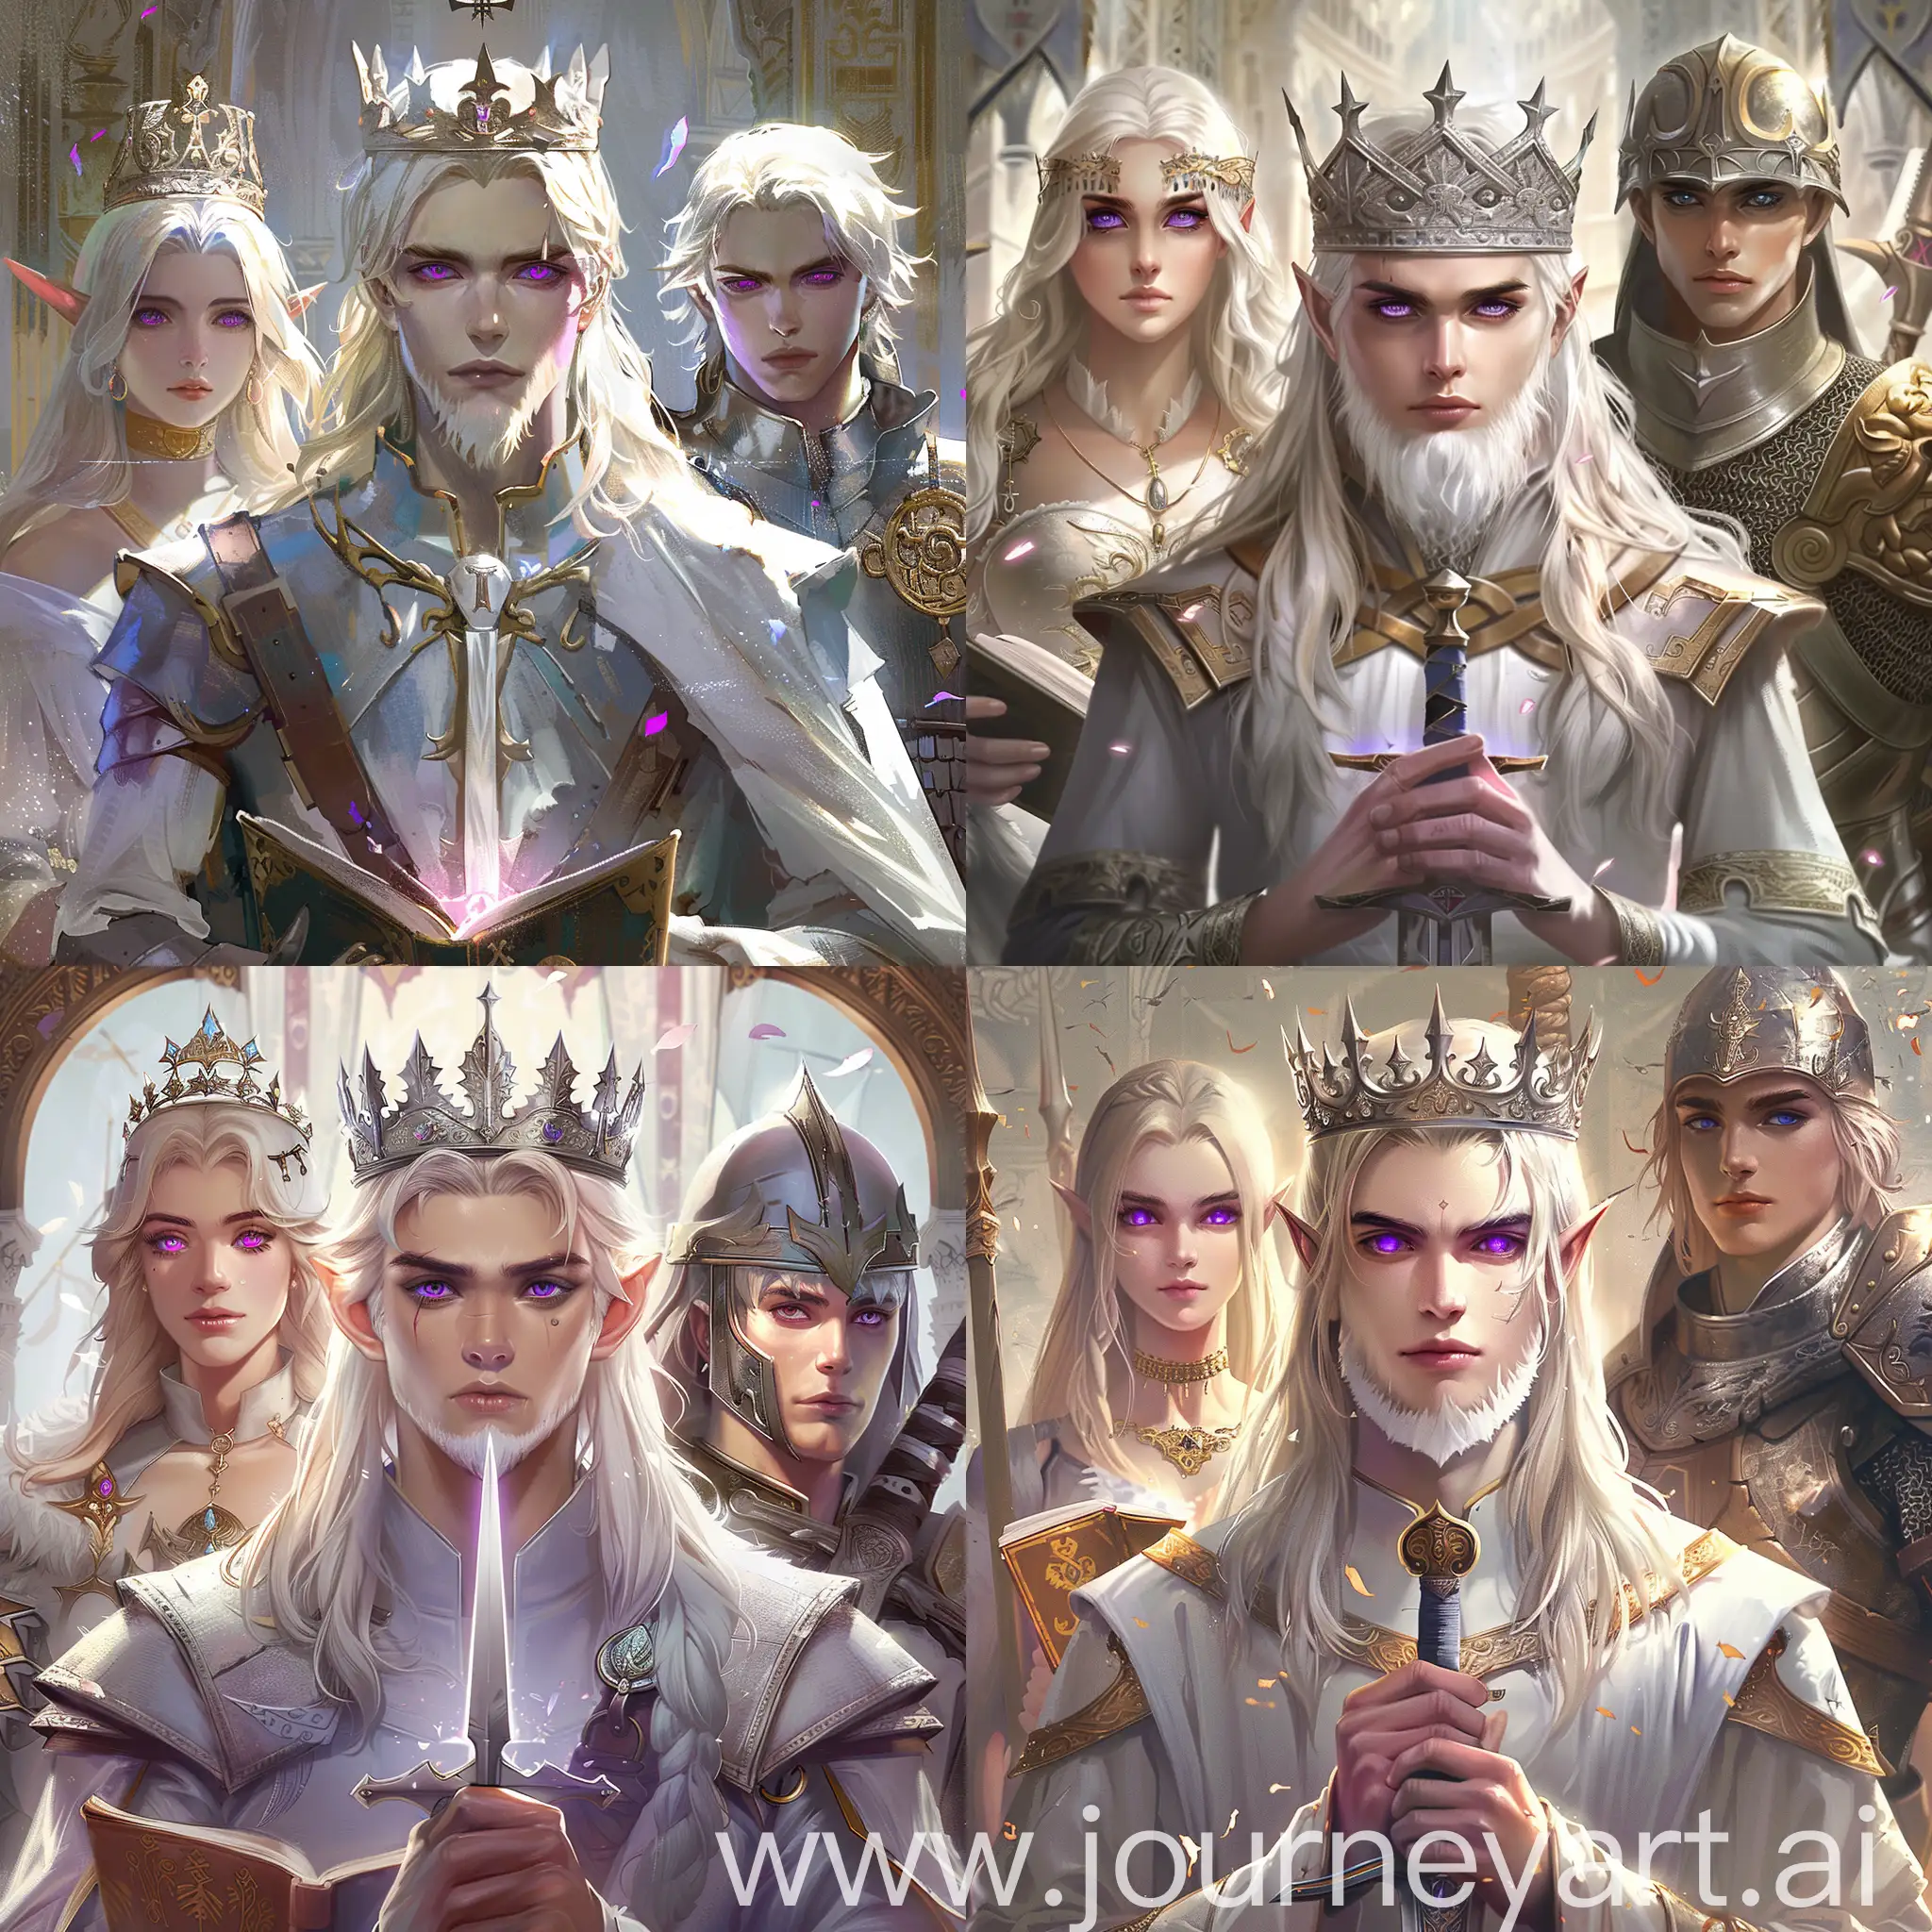 Medieval-Fantasy-Characters-Young-King-Elegant-Princess-and-Noble-Warrior-with-Sword-and-Shield